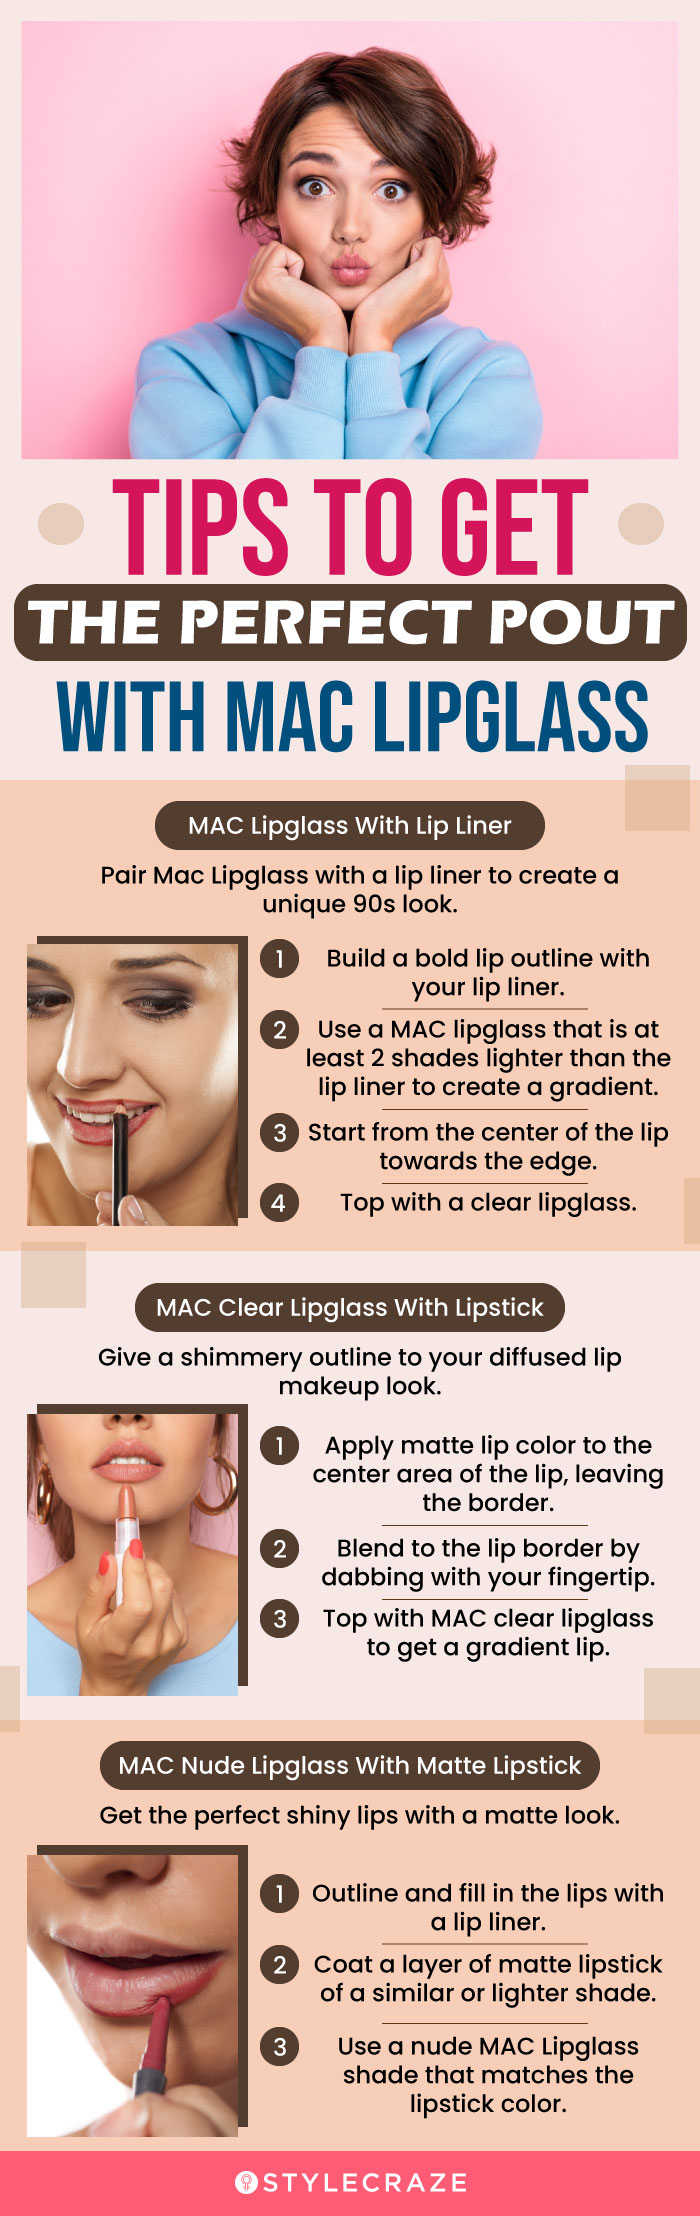 Tips To Get The Perfect Pout With MAC Lipglass (infographic)